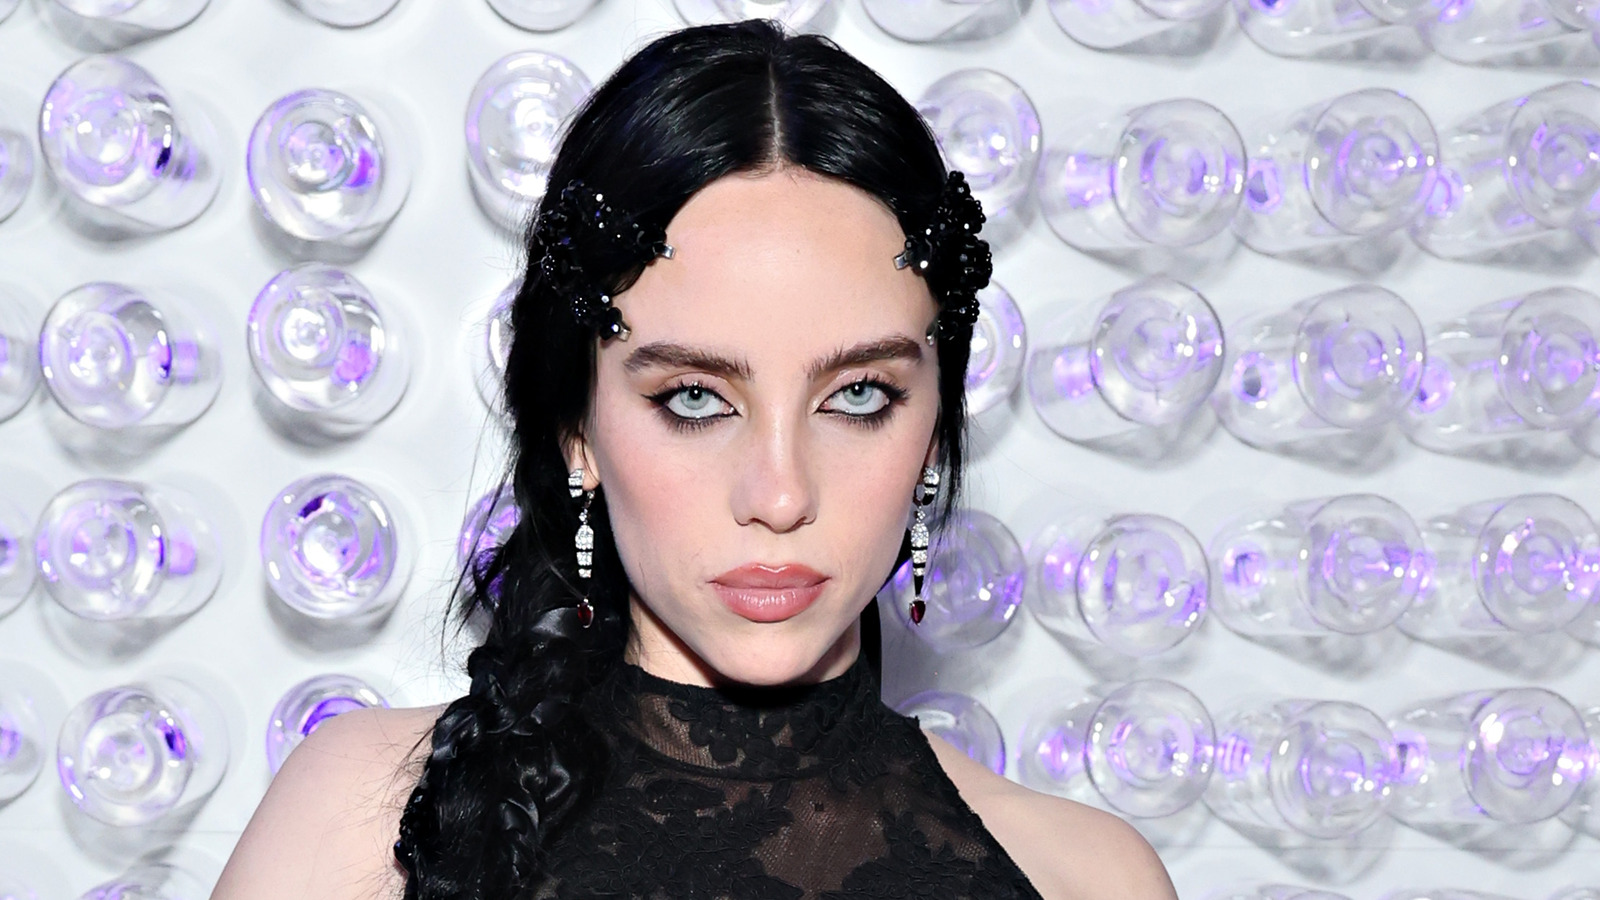 A Look At Billie Eilish's Dating History